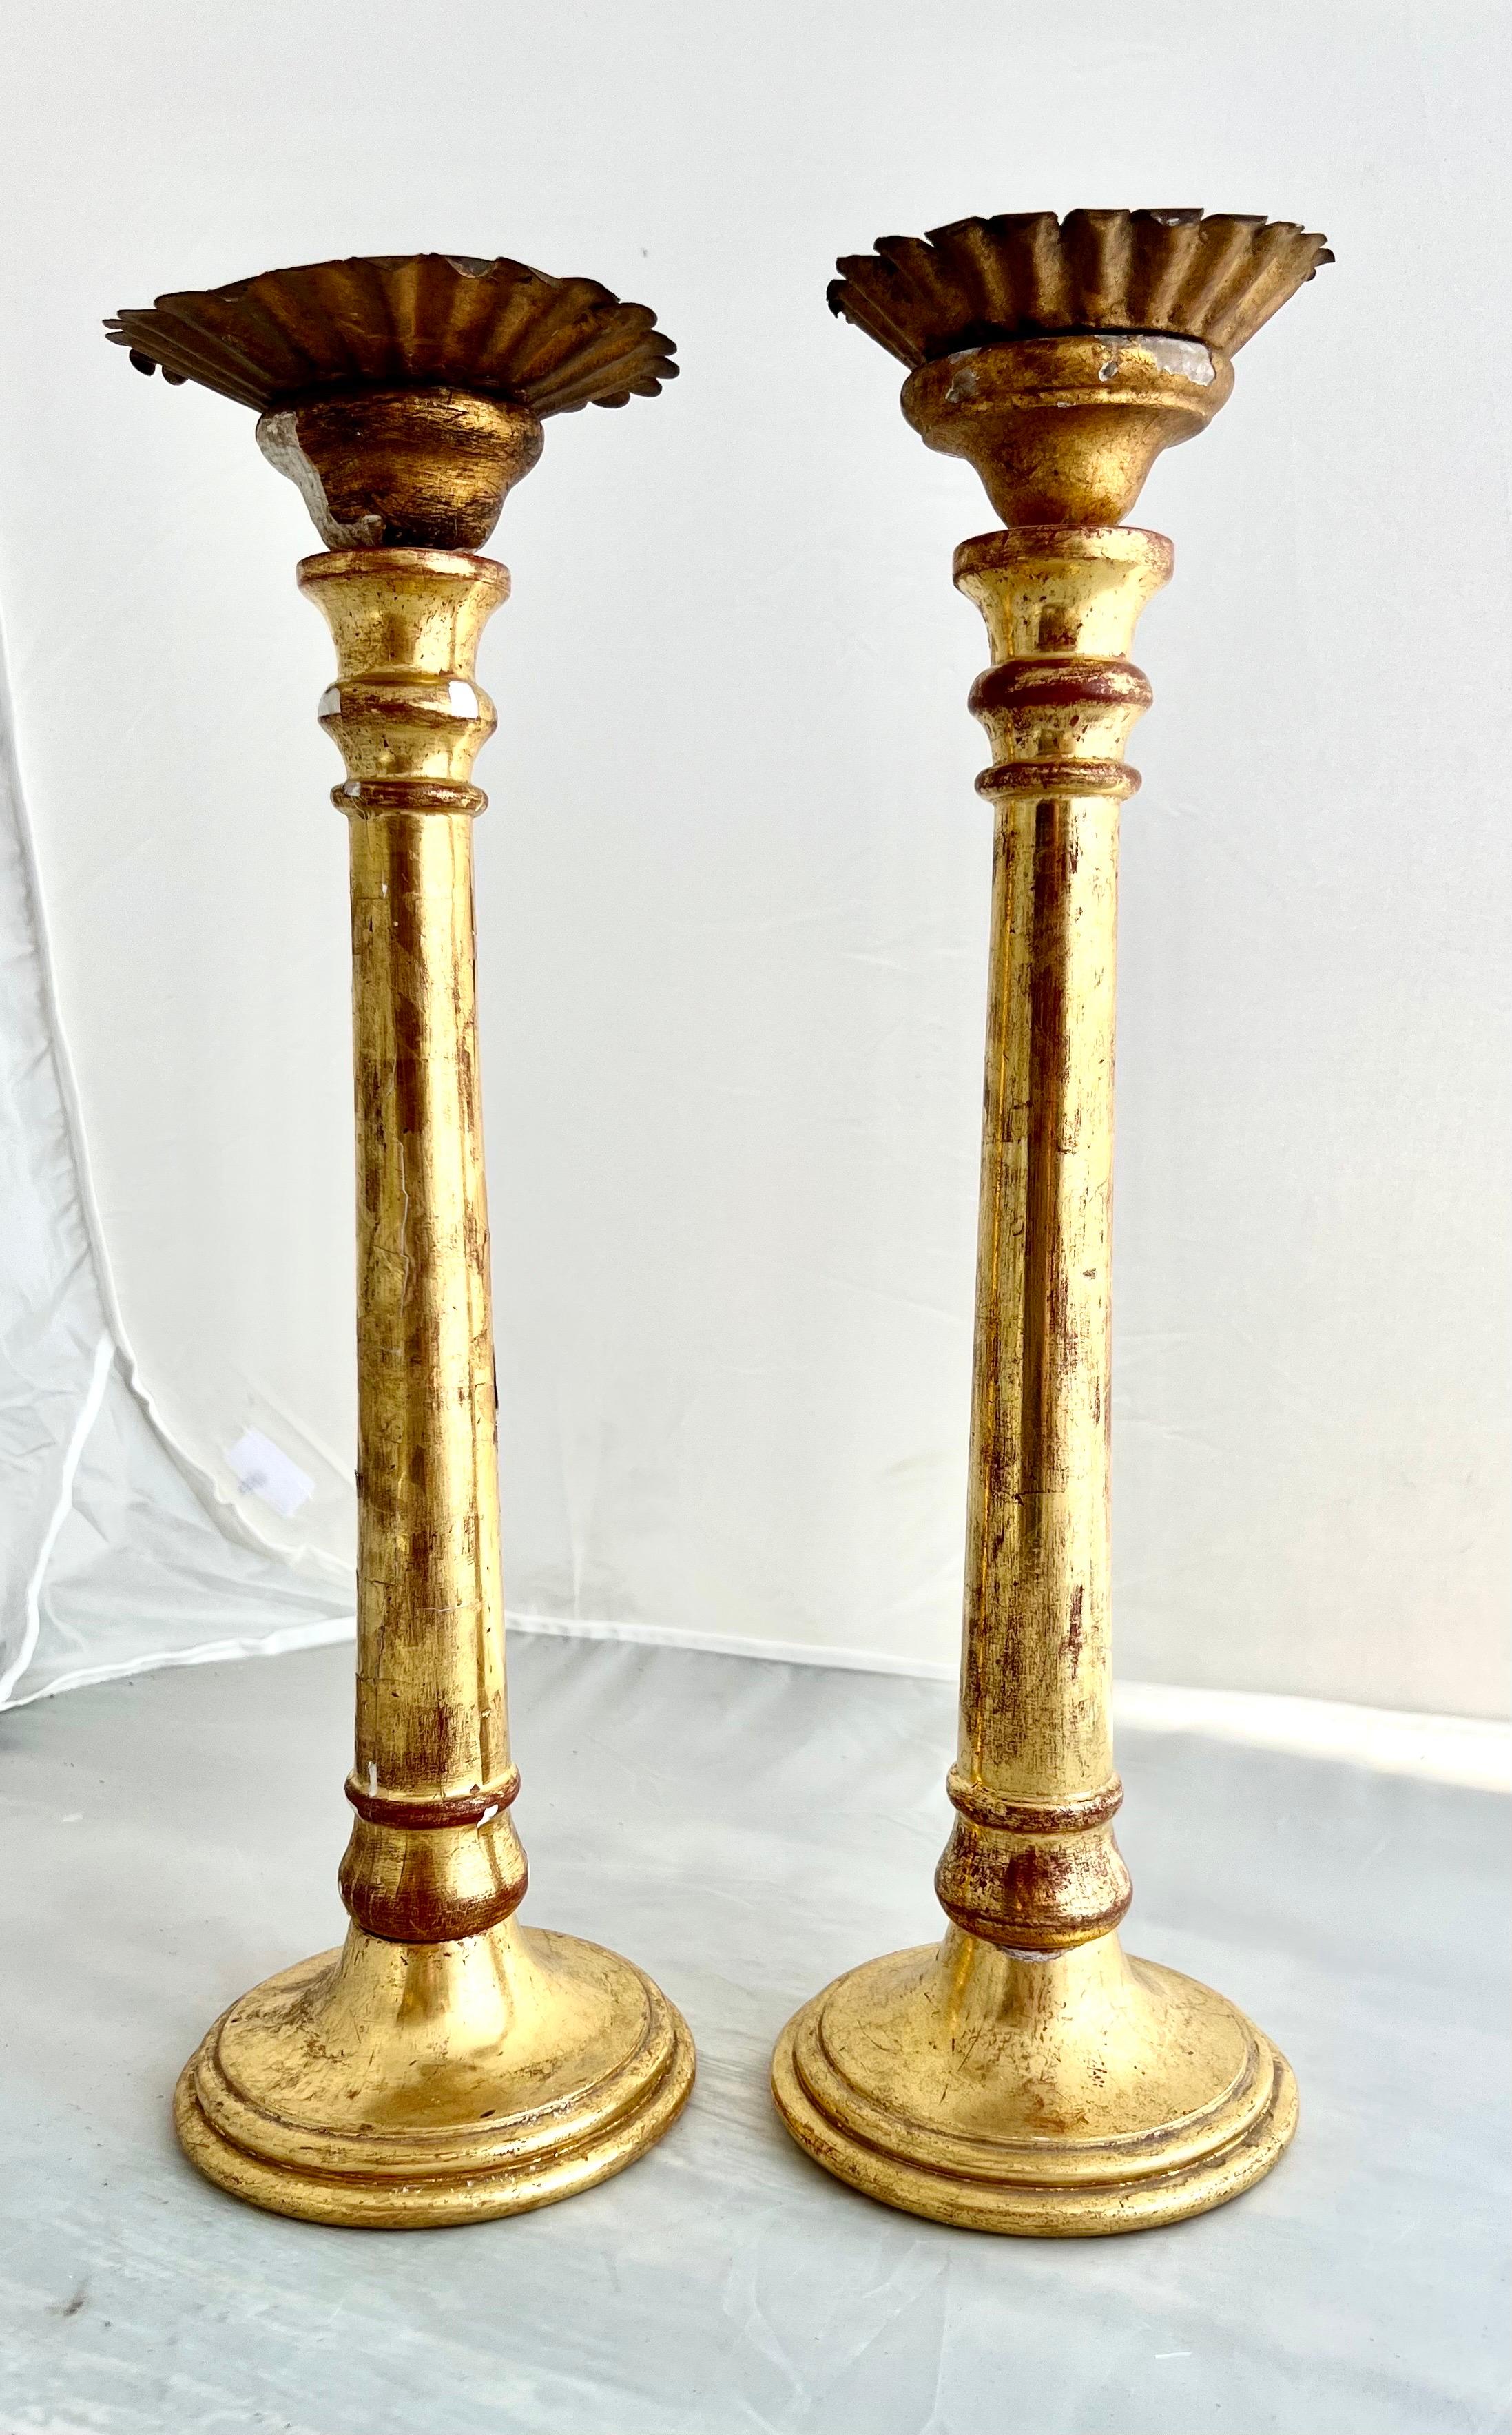 Water gilt Italian neoclassical-style candlesticks adorned with iron bobeches.   The water gilt technique imparts a lustrous and aged appearance, enhancing the overall neoclassical design.  These candlesticks, with their combination of materials,